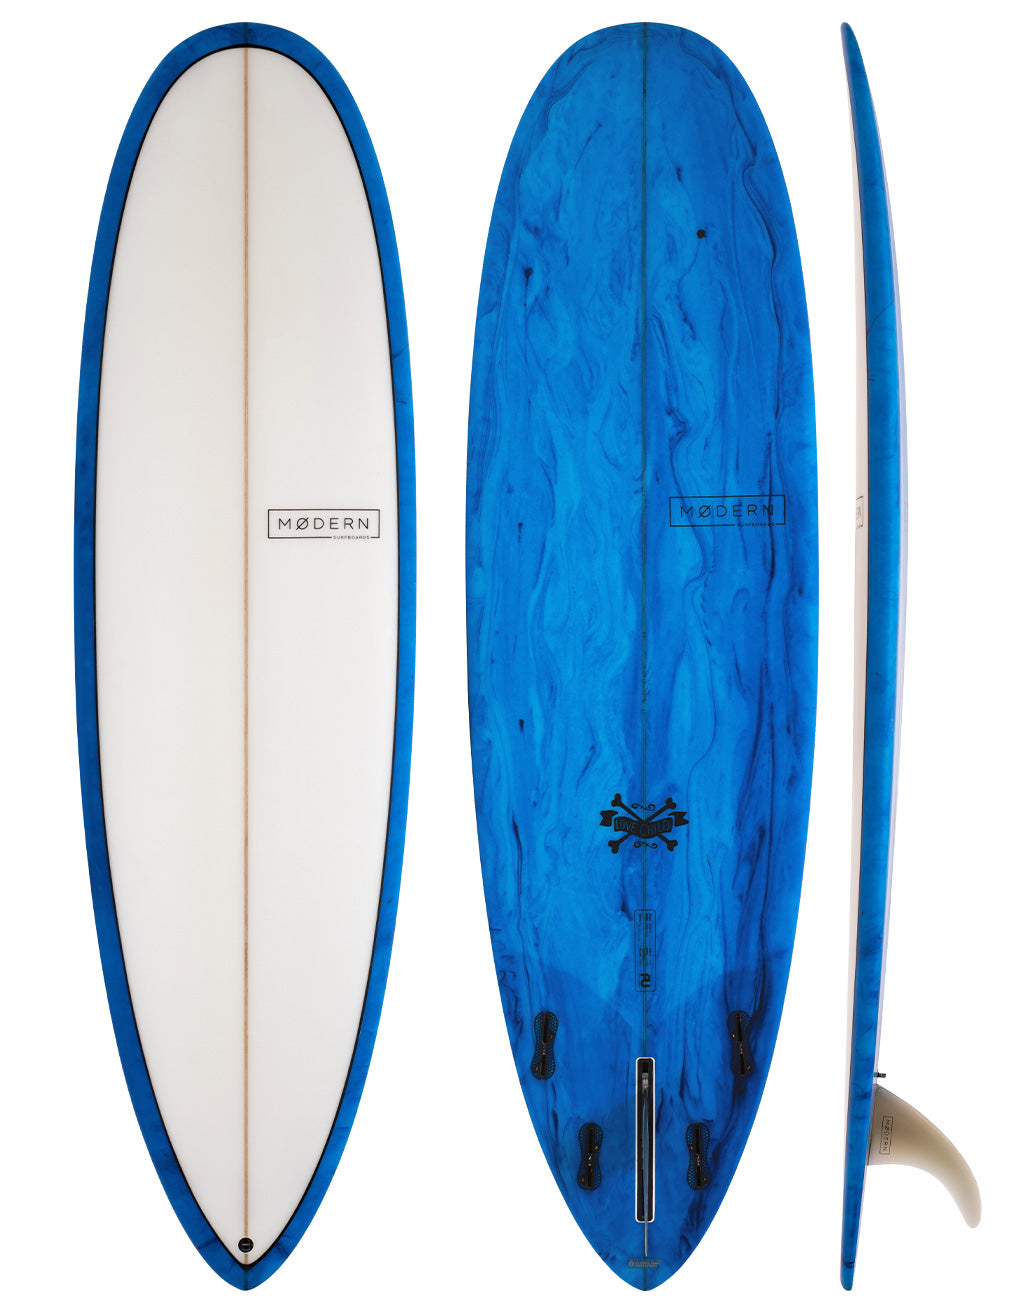 Modern Surfboards Love  Child - blue and white mid length surfboard